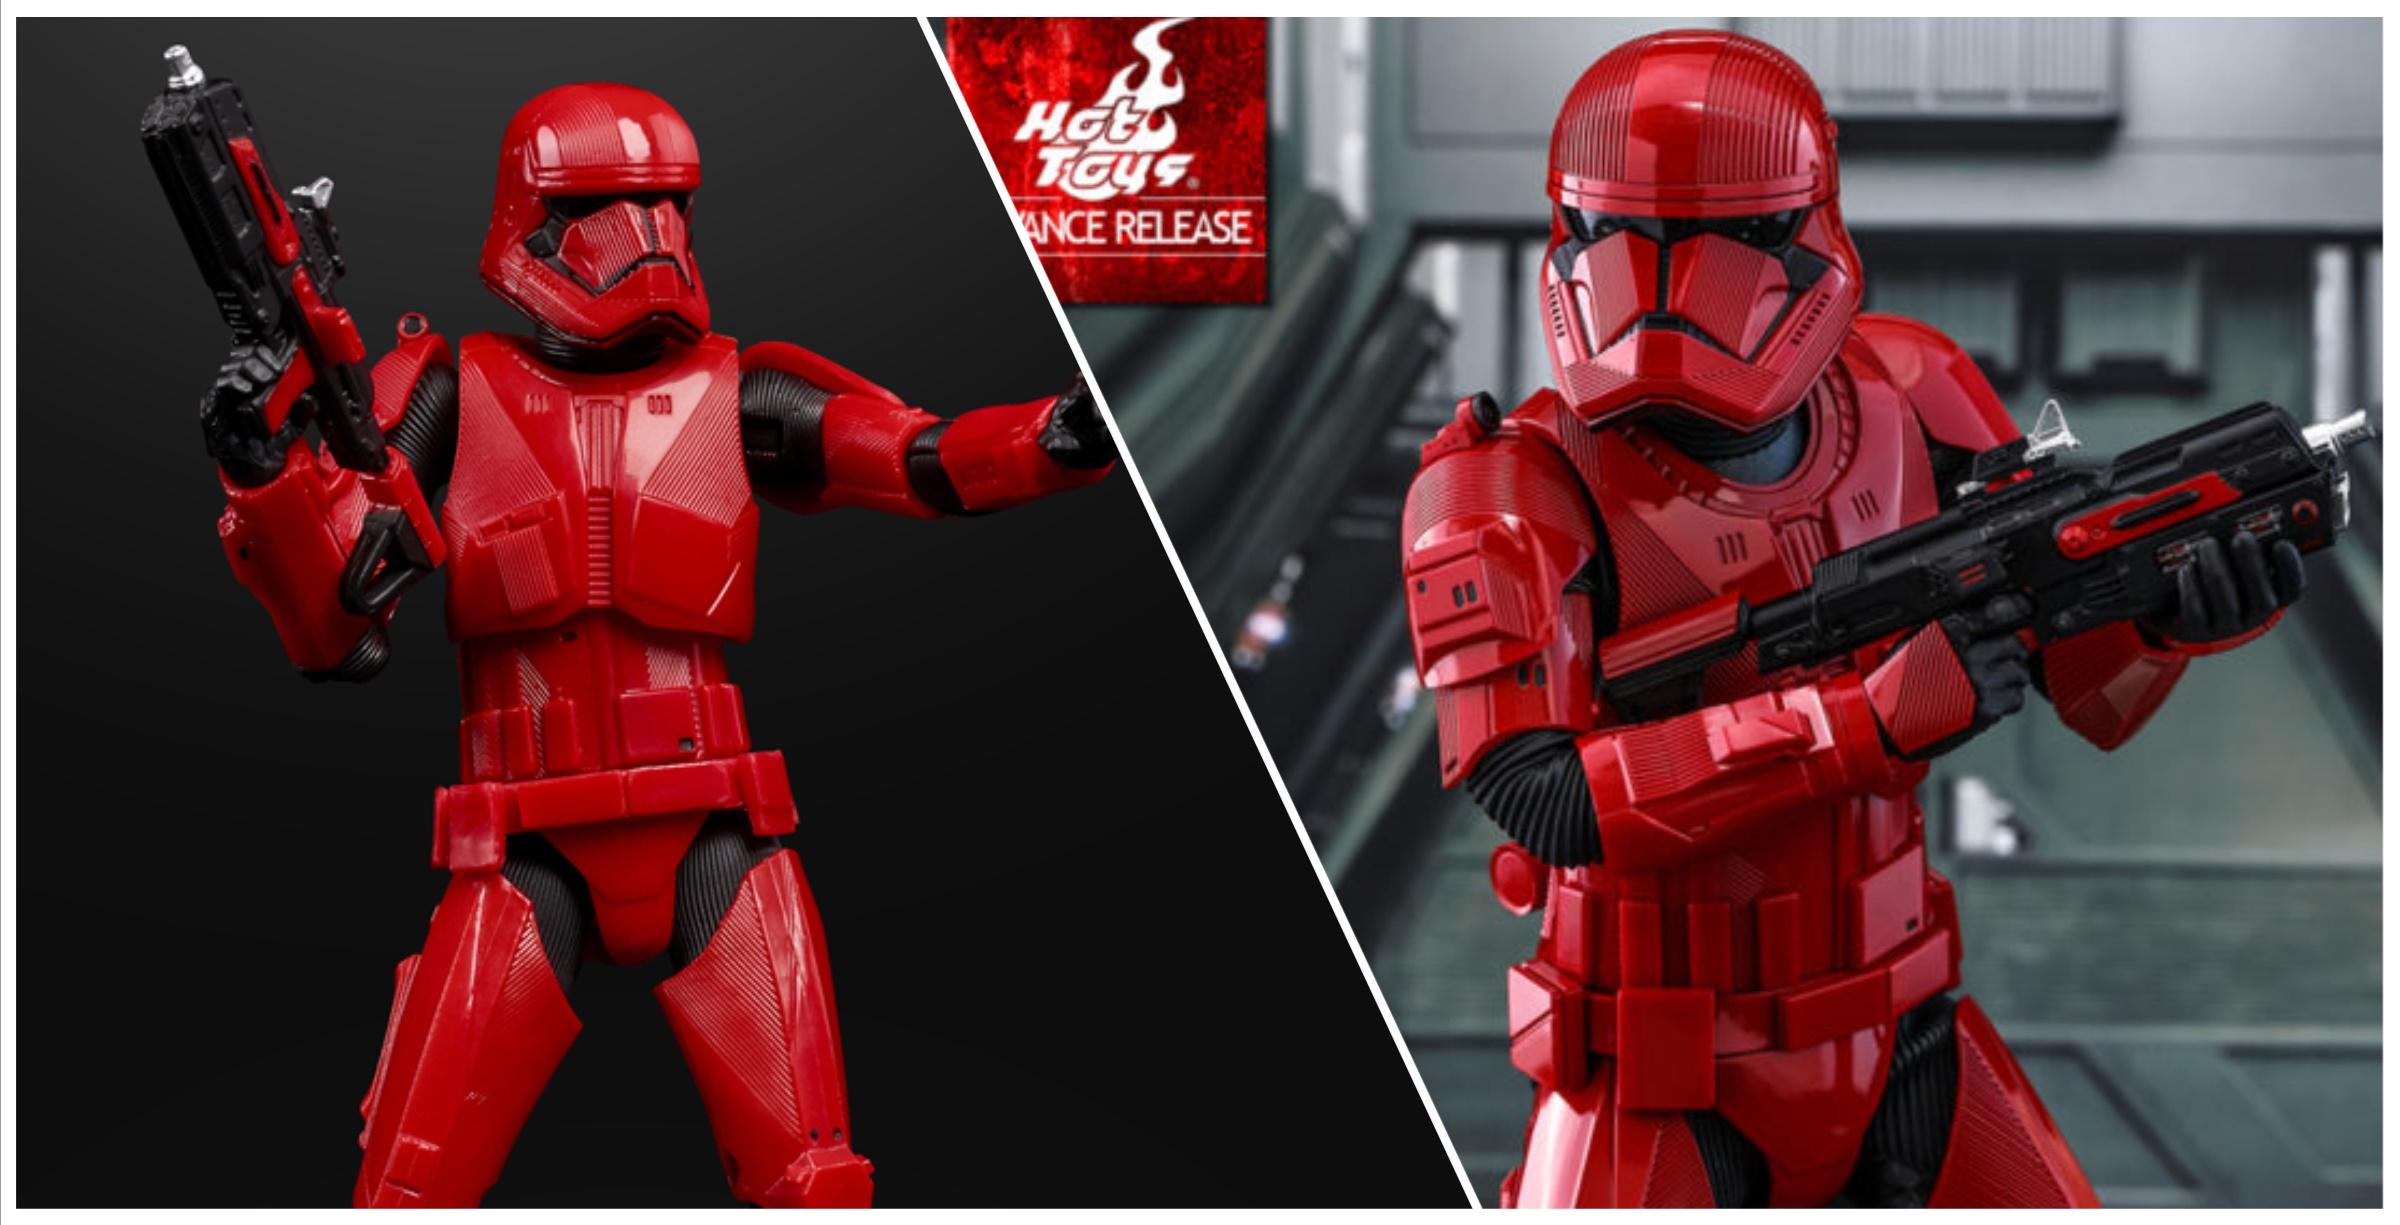 Star Wars Black Series Sith Trooper Revealed And a Hot Toys